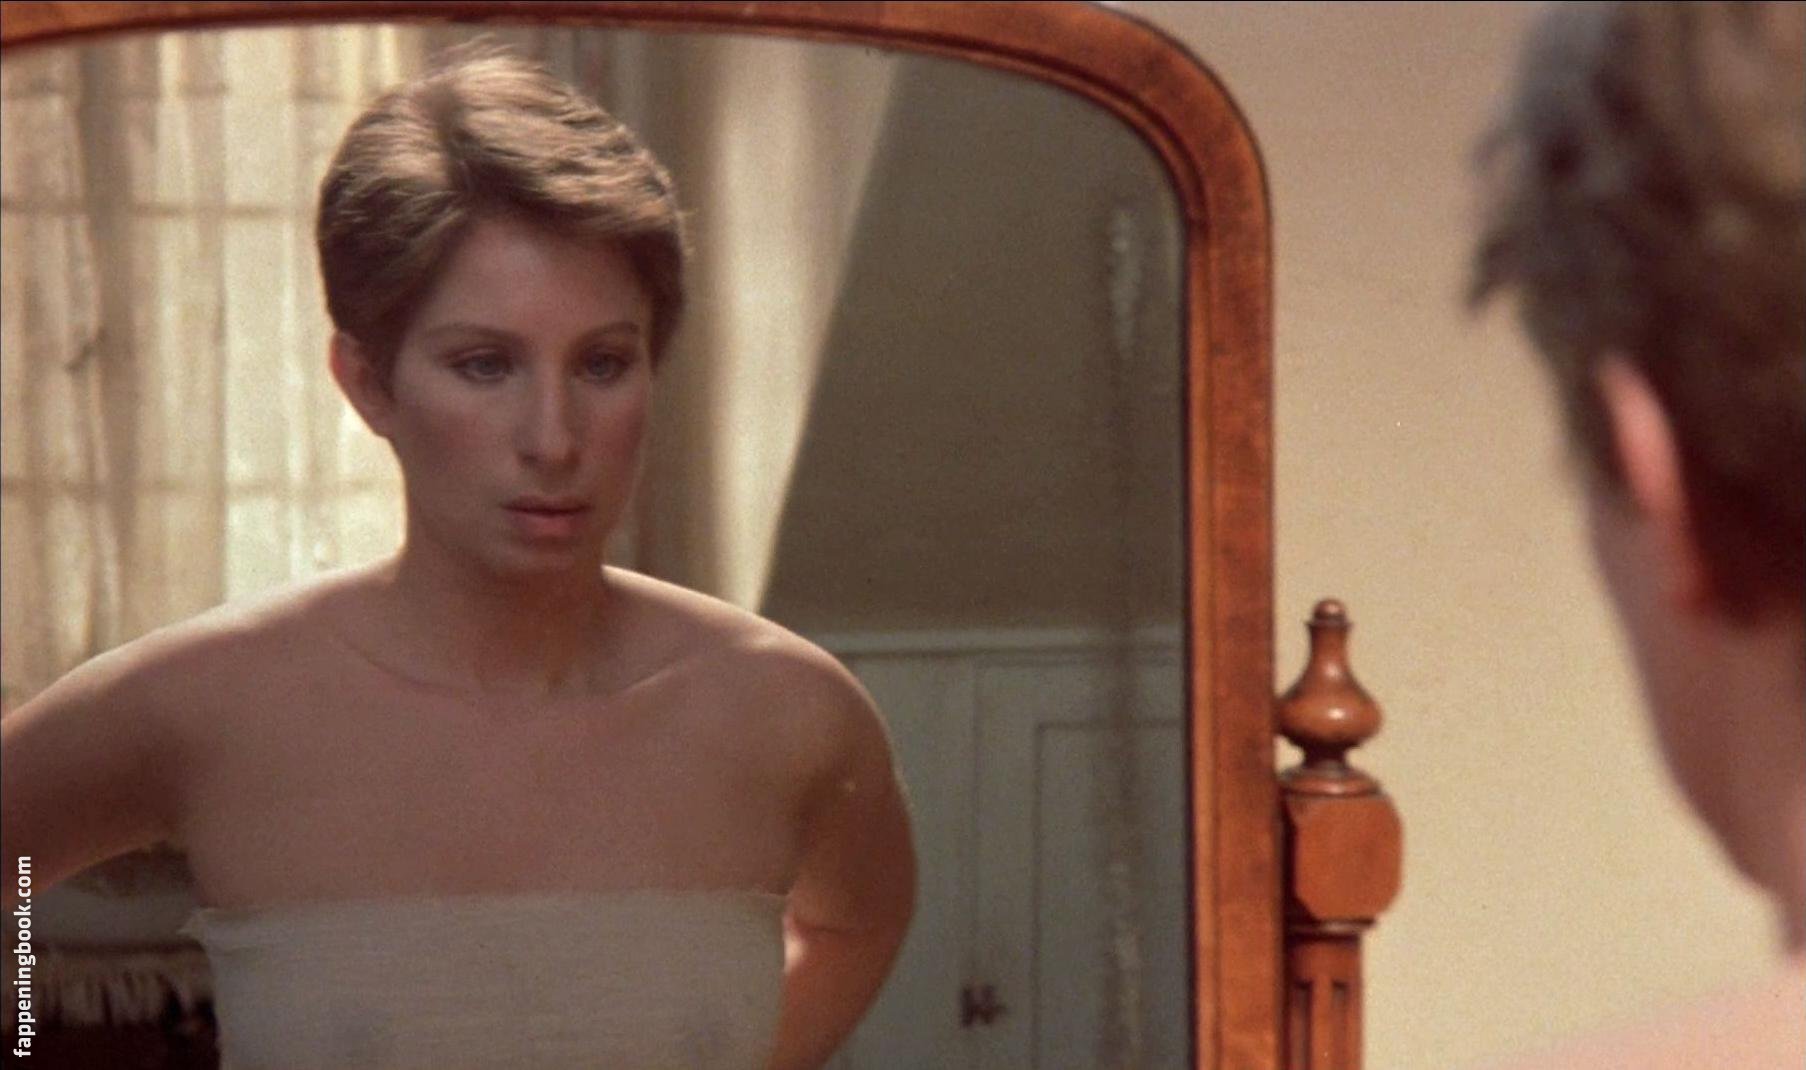 Barbra Streisand Nude, The Fappening - Photo #65166 - FappeningBook.